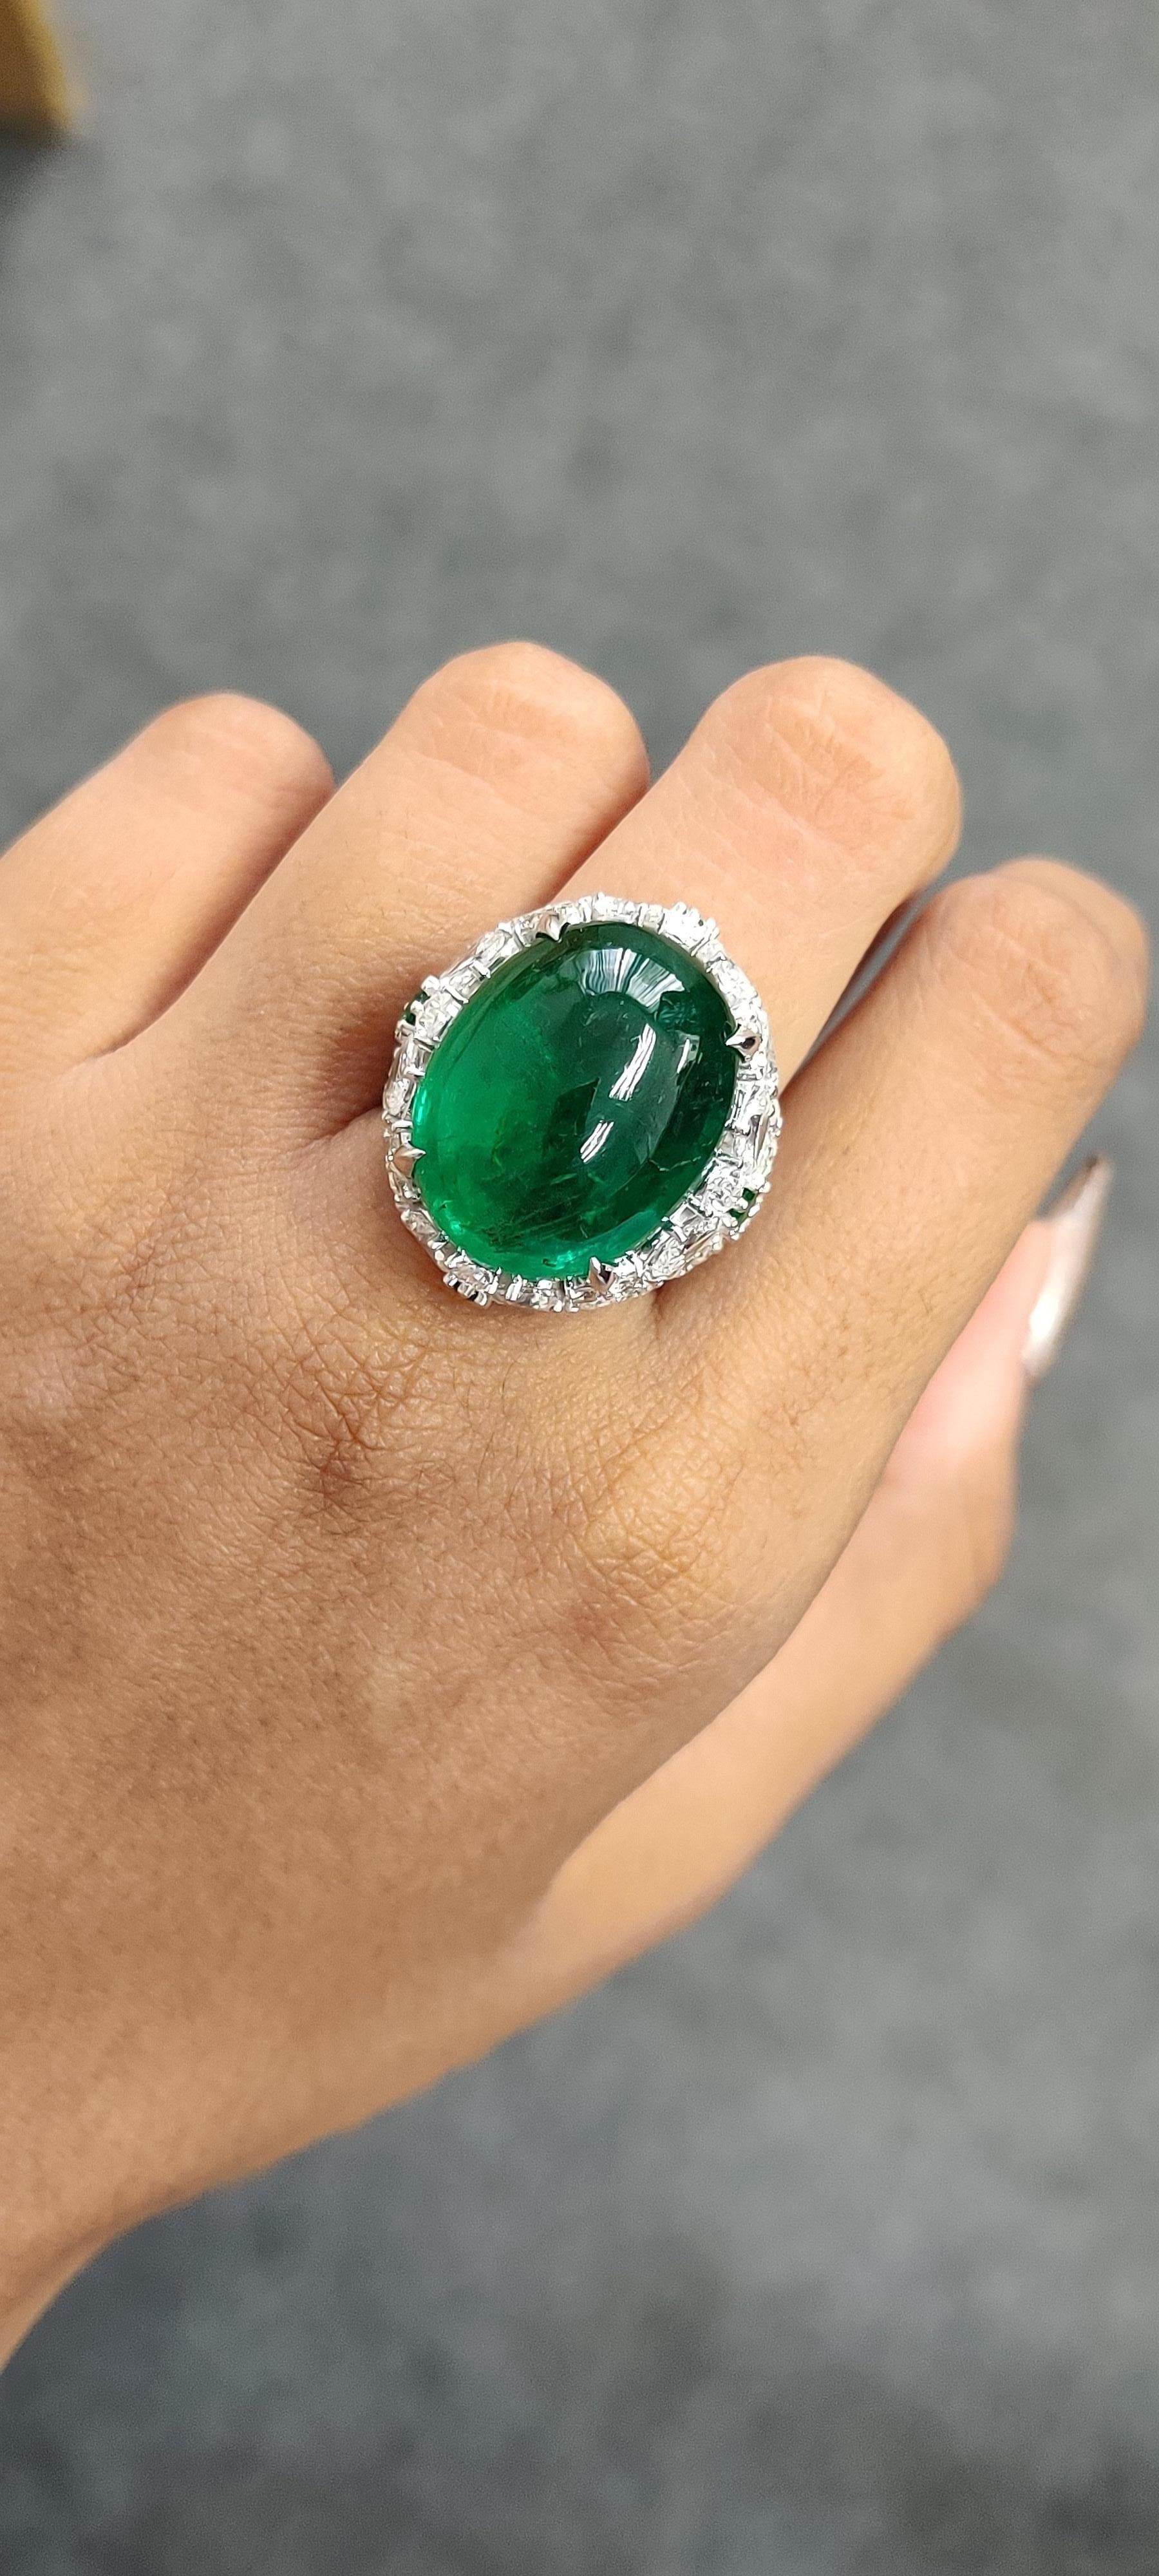 24.60 Carat Cabochon Emerald Art Deco Inspired One-of-a-kind Statement Ring For Sale 2